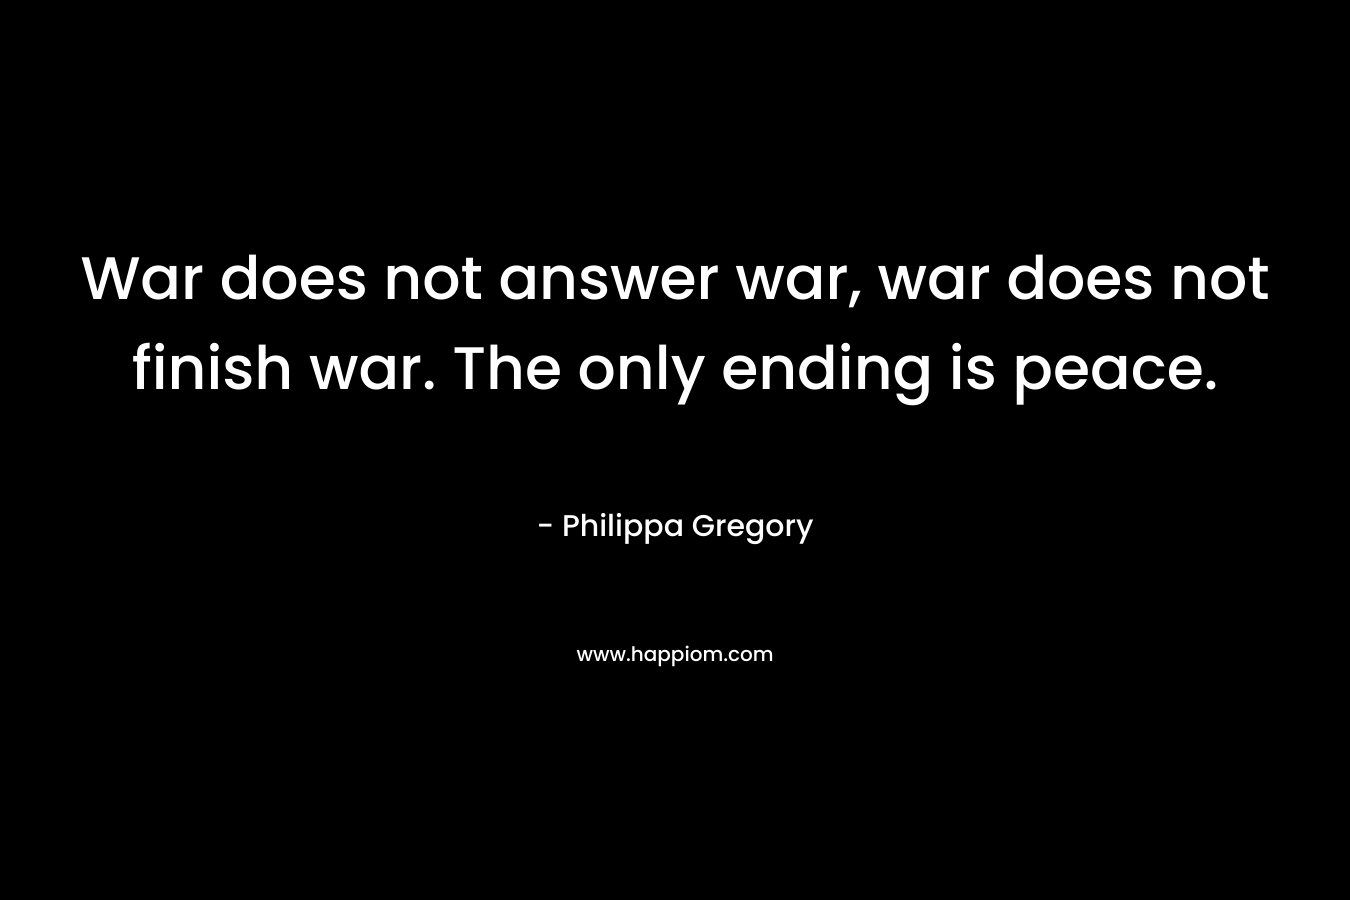 War does not answer war, war does not finish war. The only ending is peace.